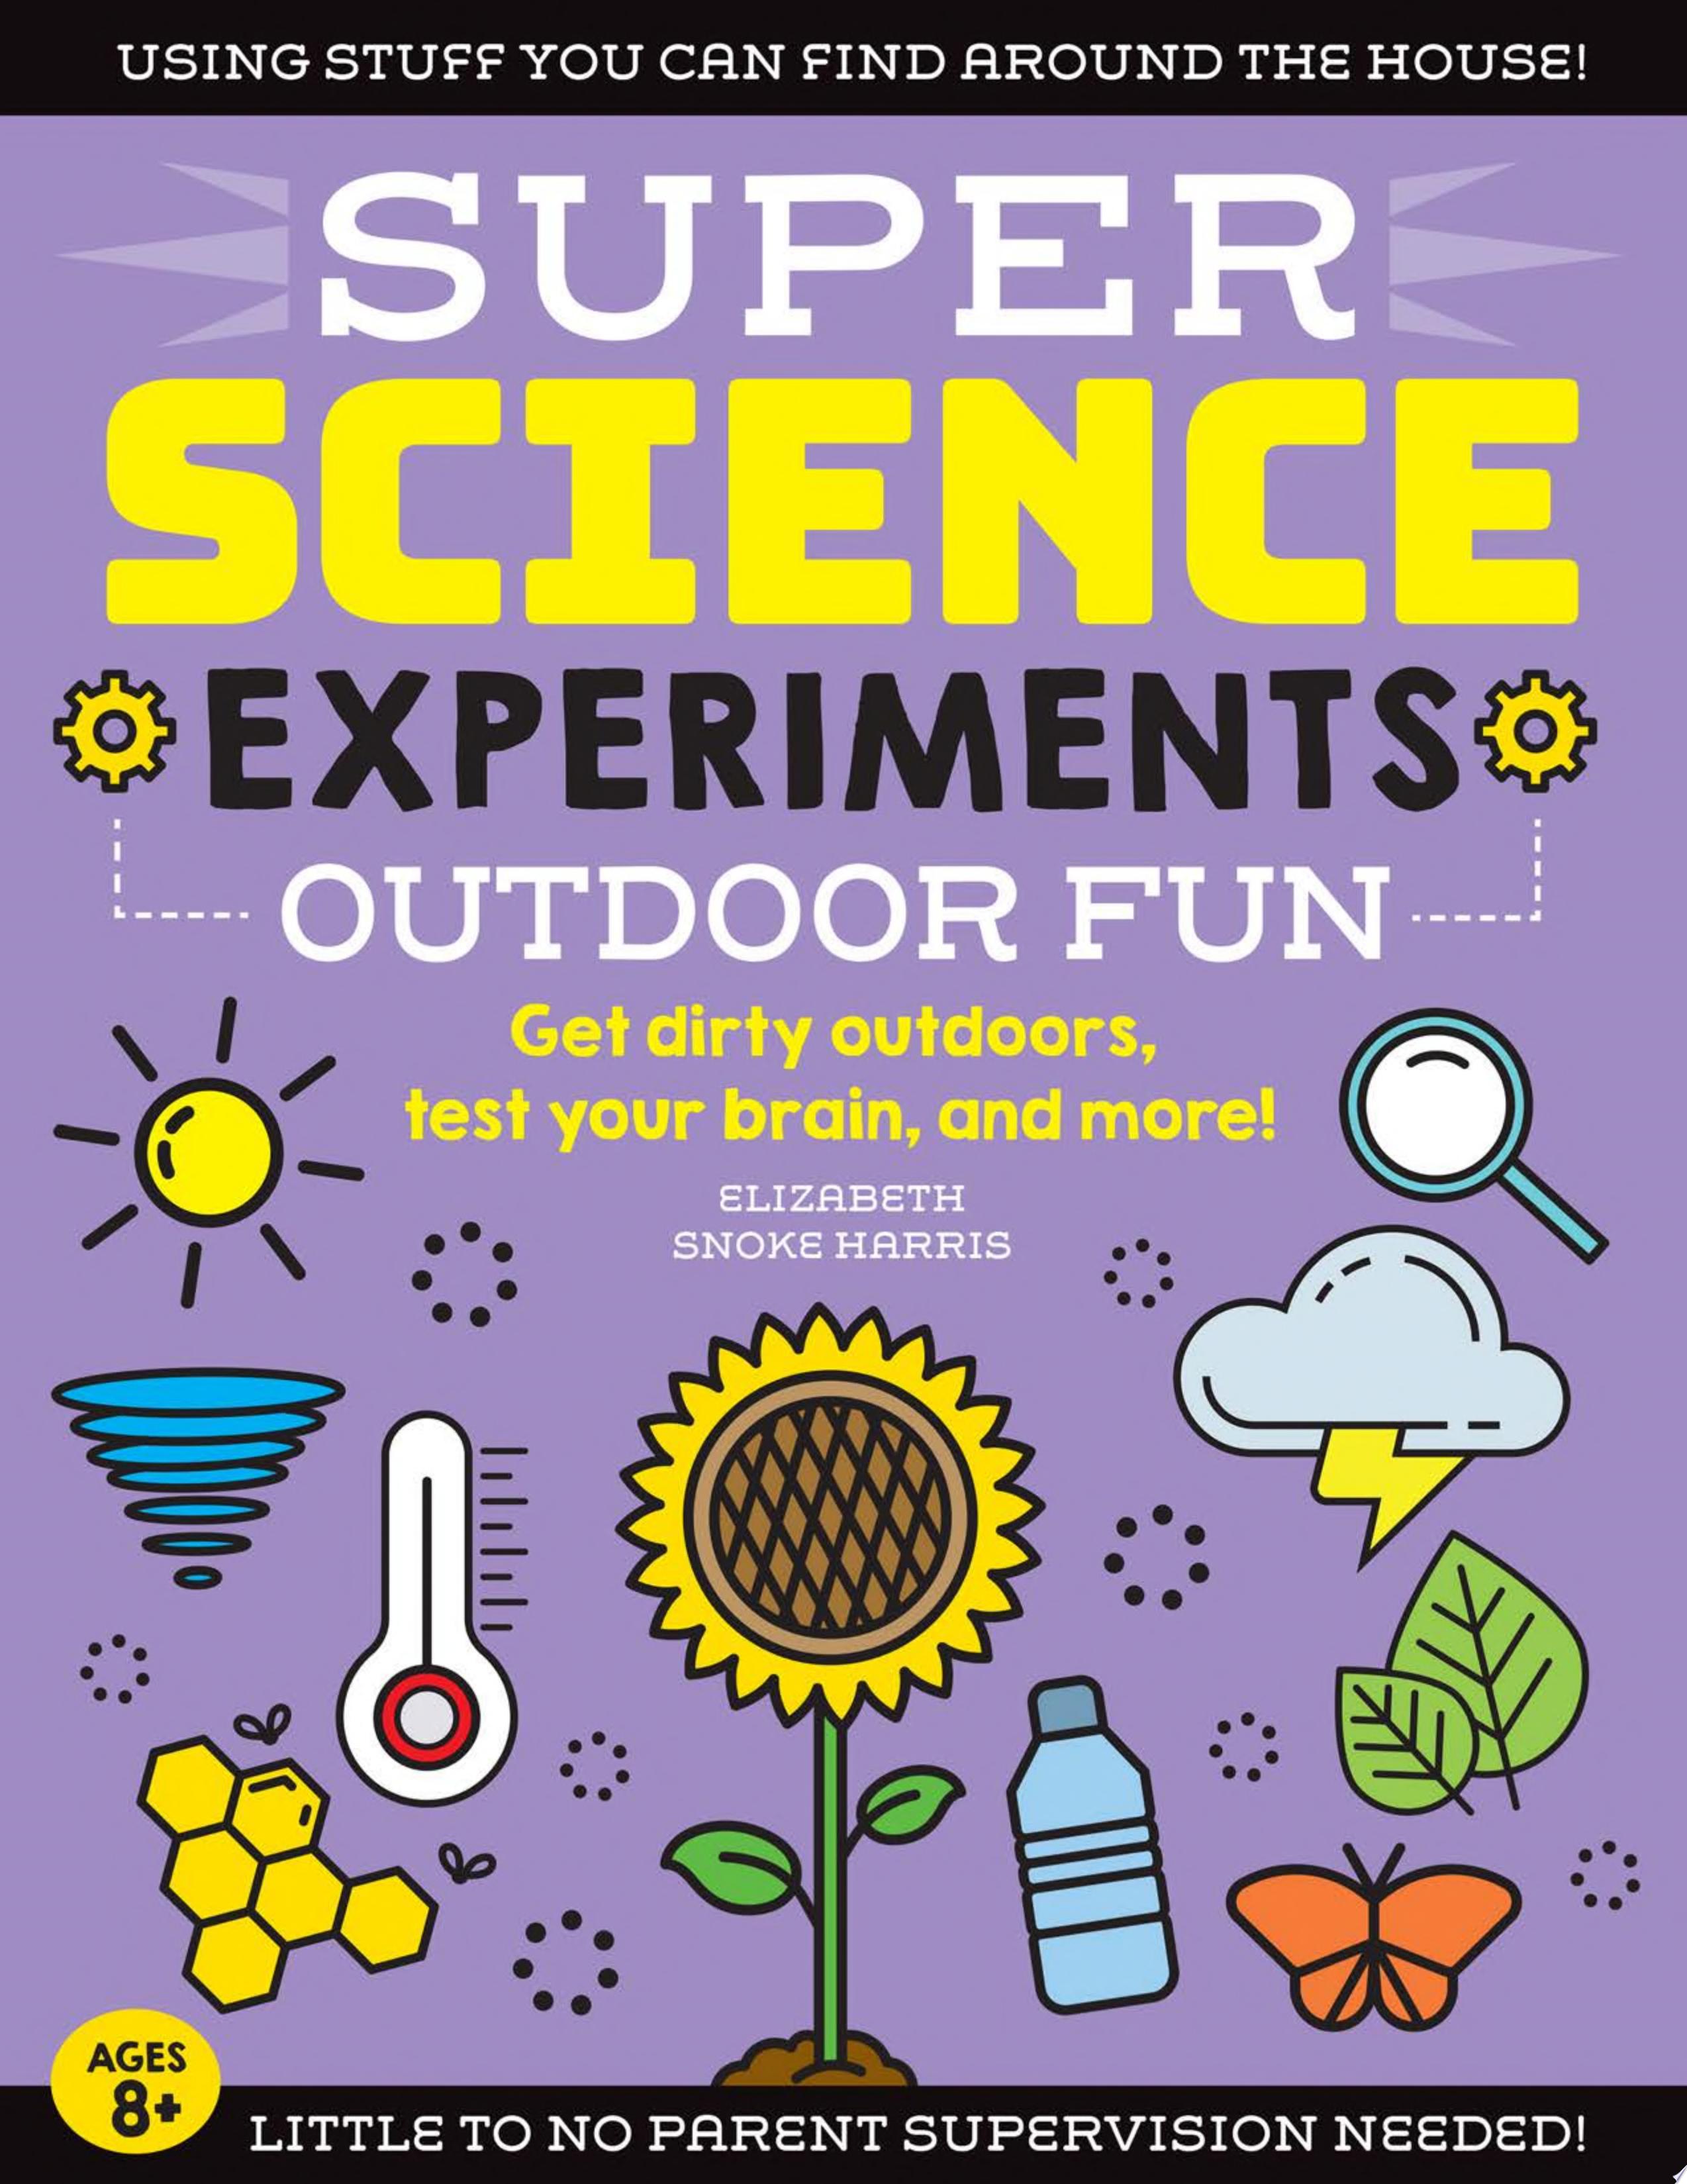 Image for "SUPER Science Experiments: Outdoor Fun"